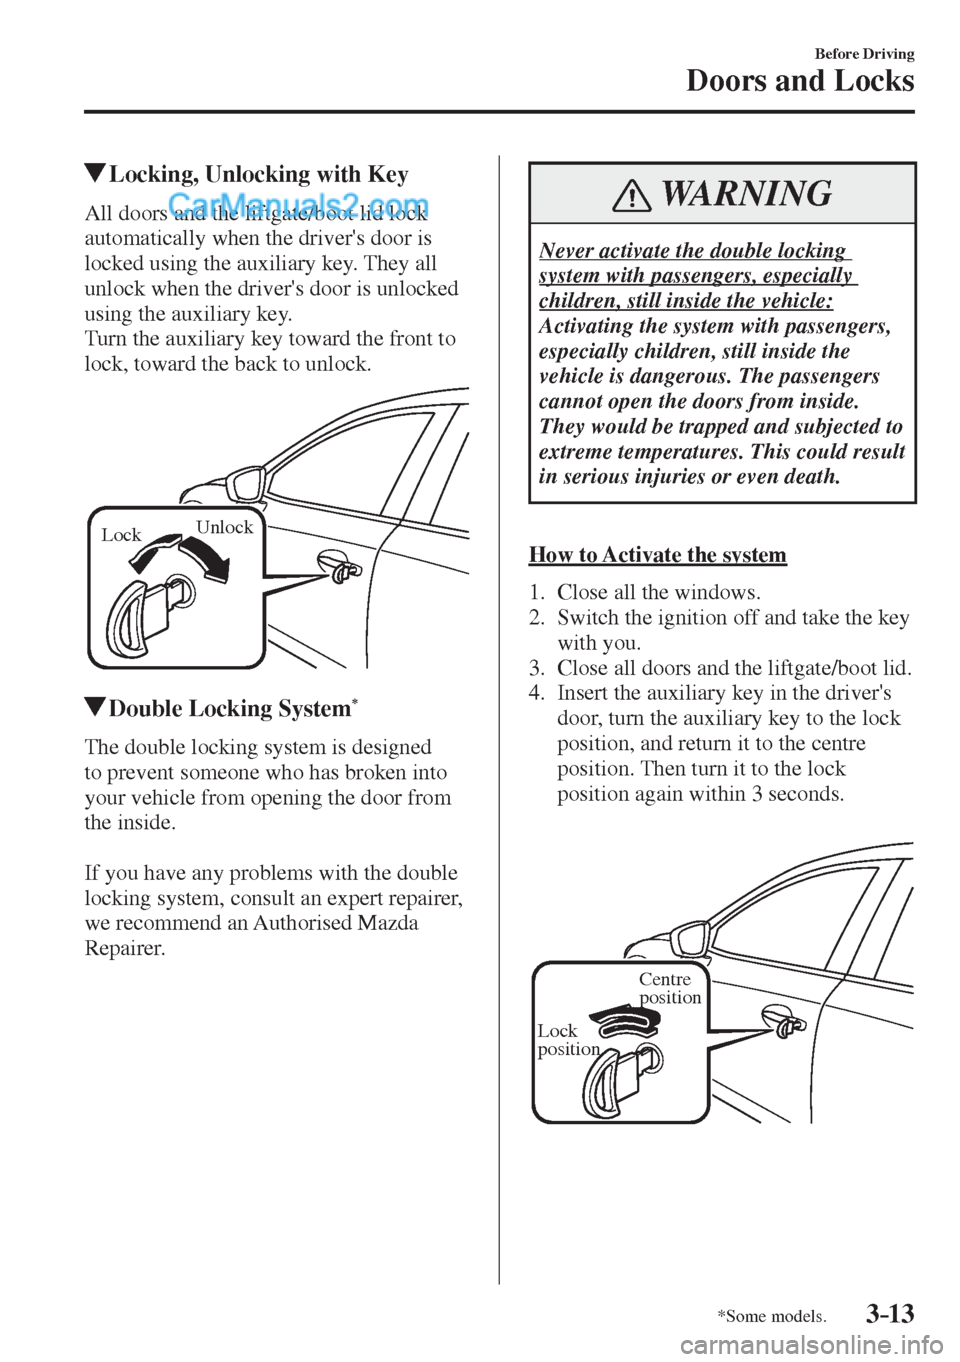 MAZDA MODEL 2 2017  Owners Manual (in English) 3–13
Before Driving
Doors and Locks
*Some models.
         Locking, Unlocking with Key
    All doors and the liftgate/boot lid lock 
automatically when the drivers door is 
locked using the auxilia